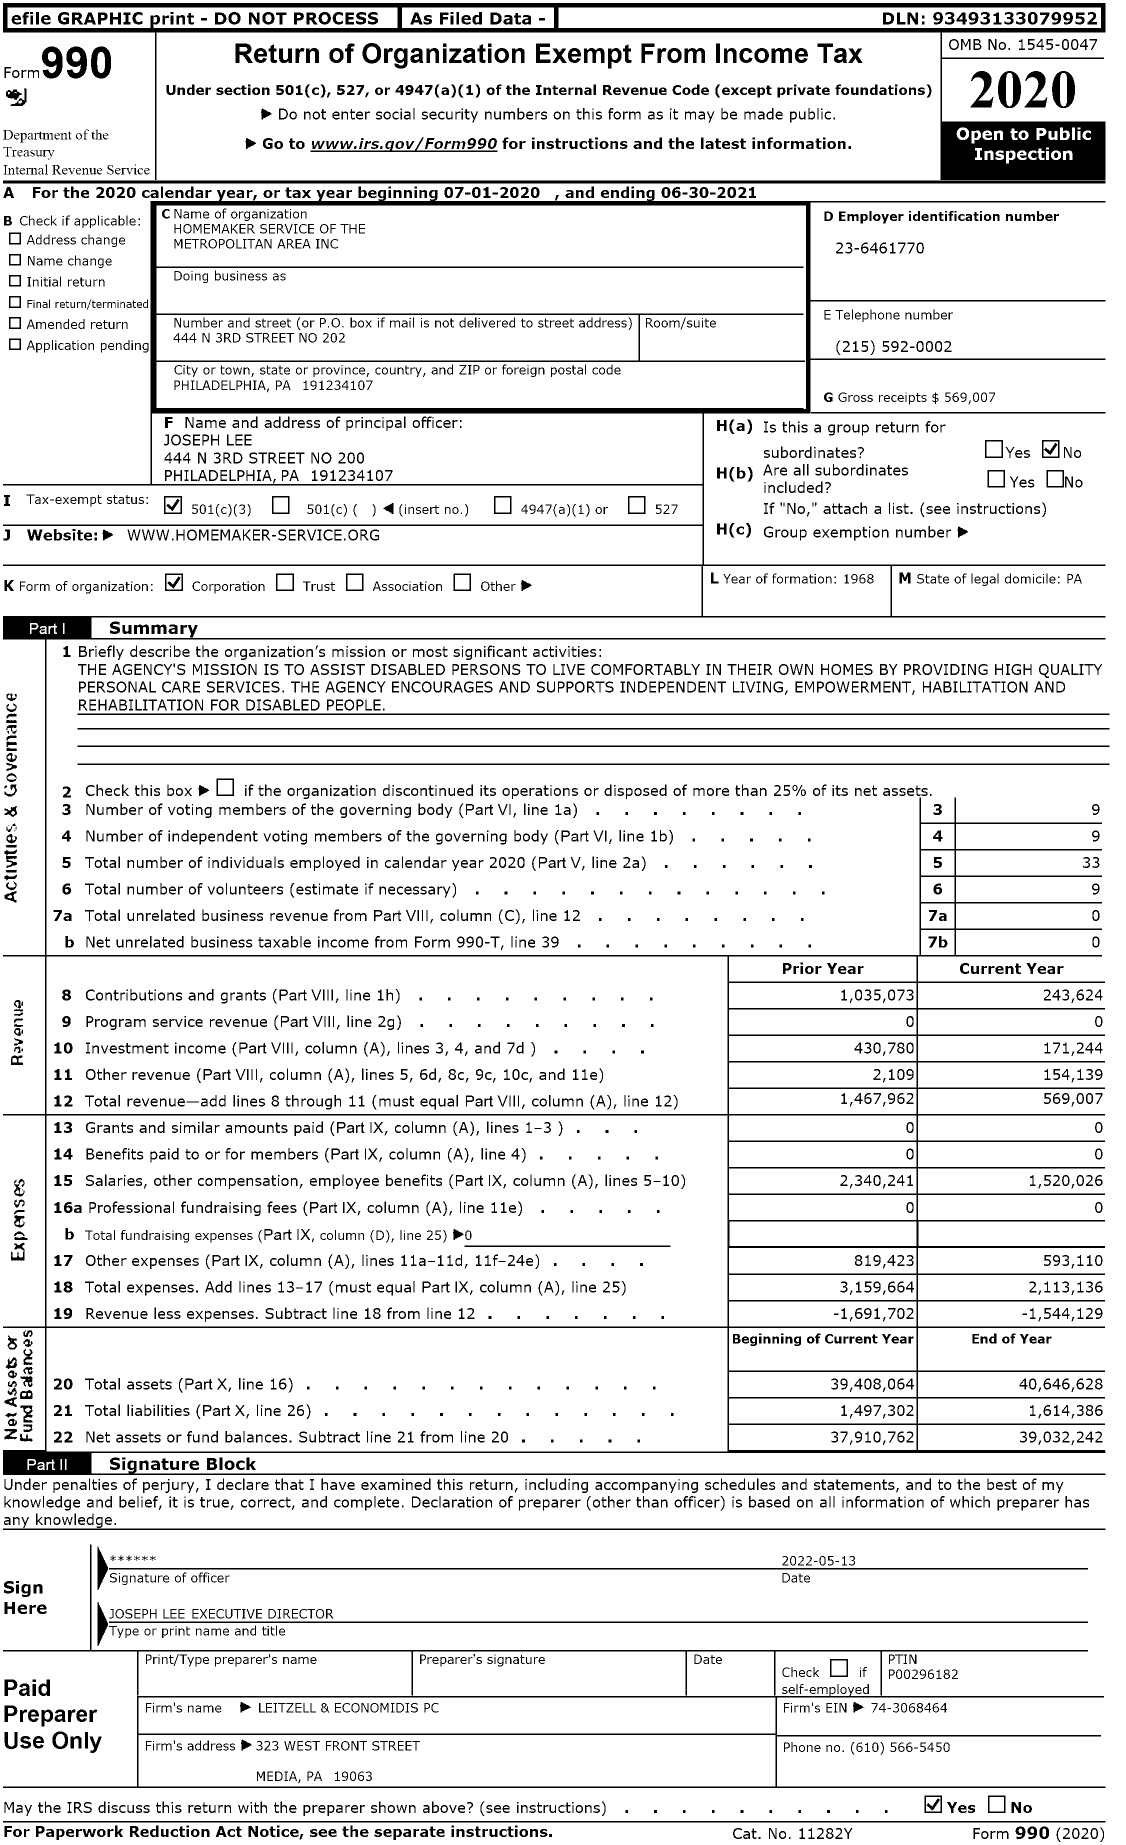 Image of first page of 2020 Form 990 for Homemaker Service of the Metropolitan Area (HSMA)